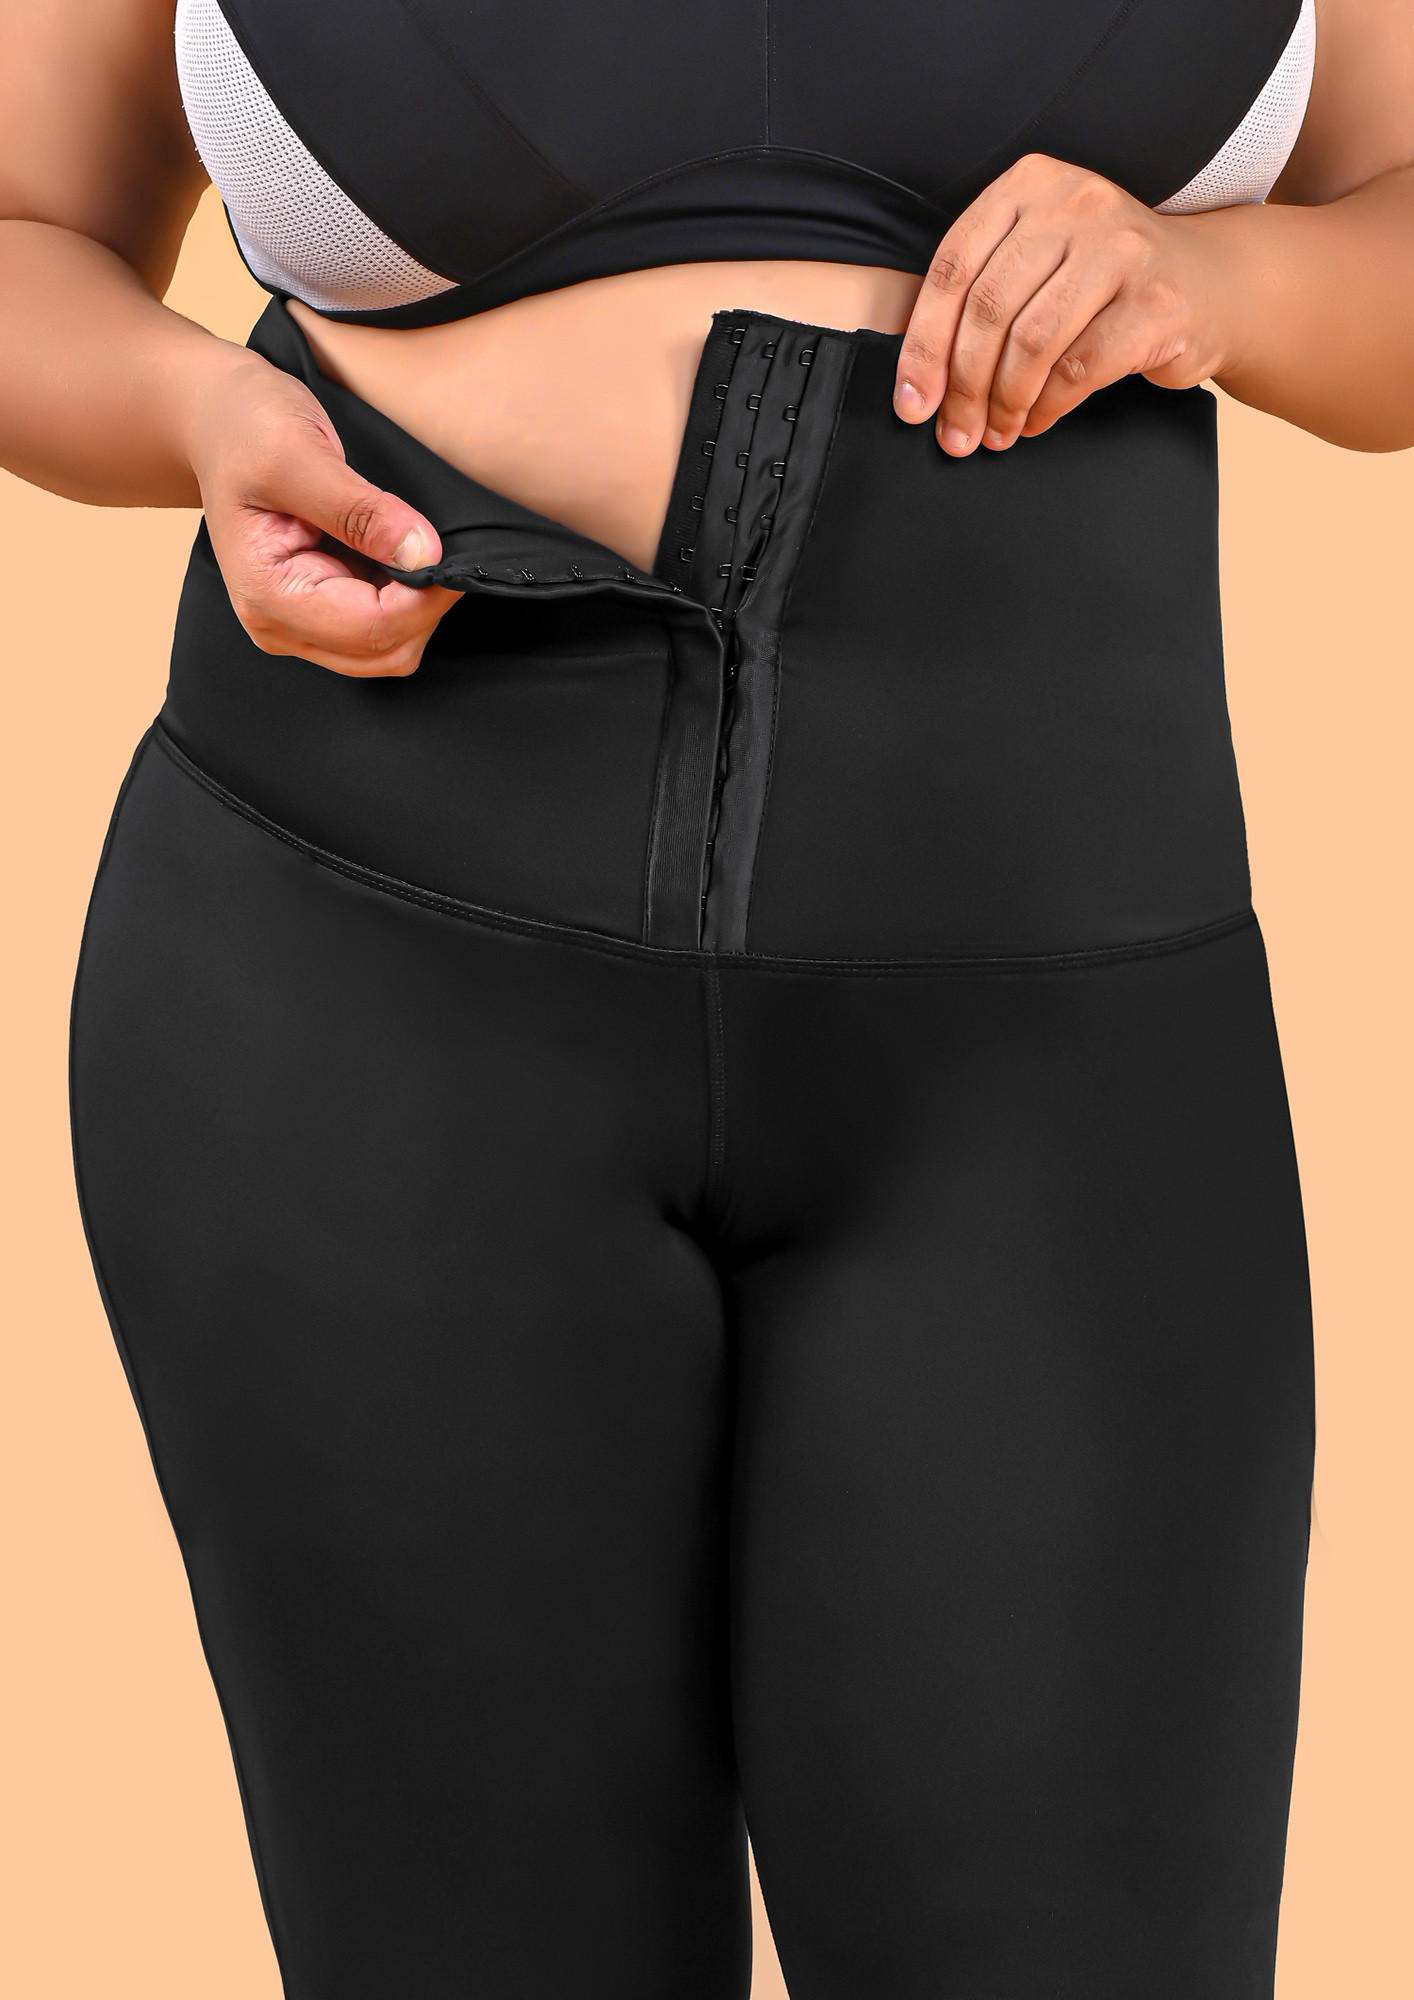 Up To 73% Off on Women High Waisted Yoga Shor